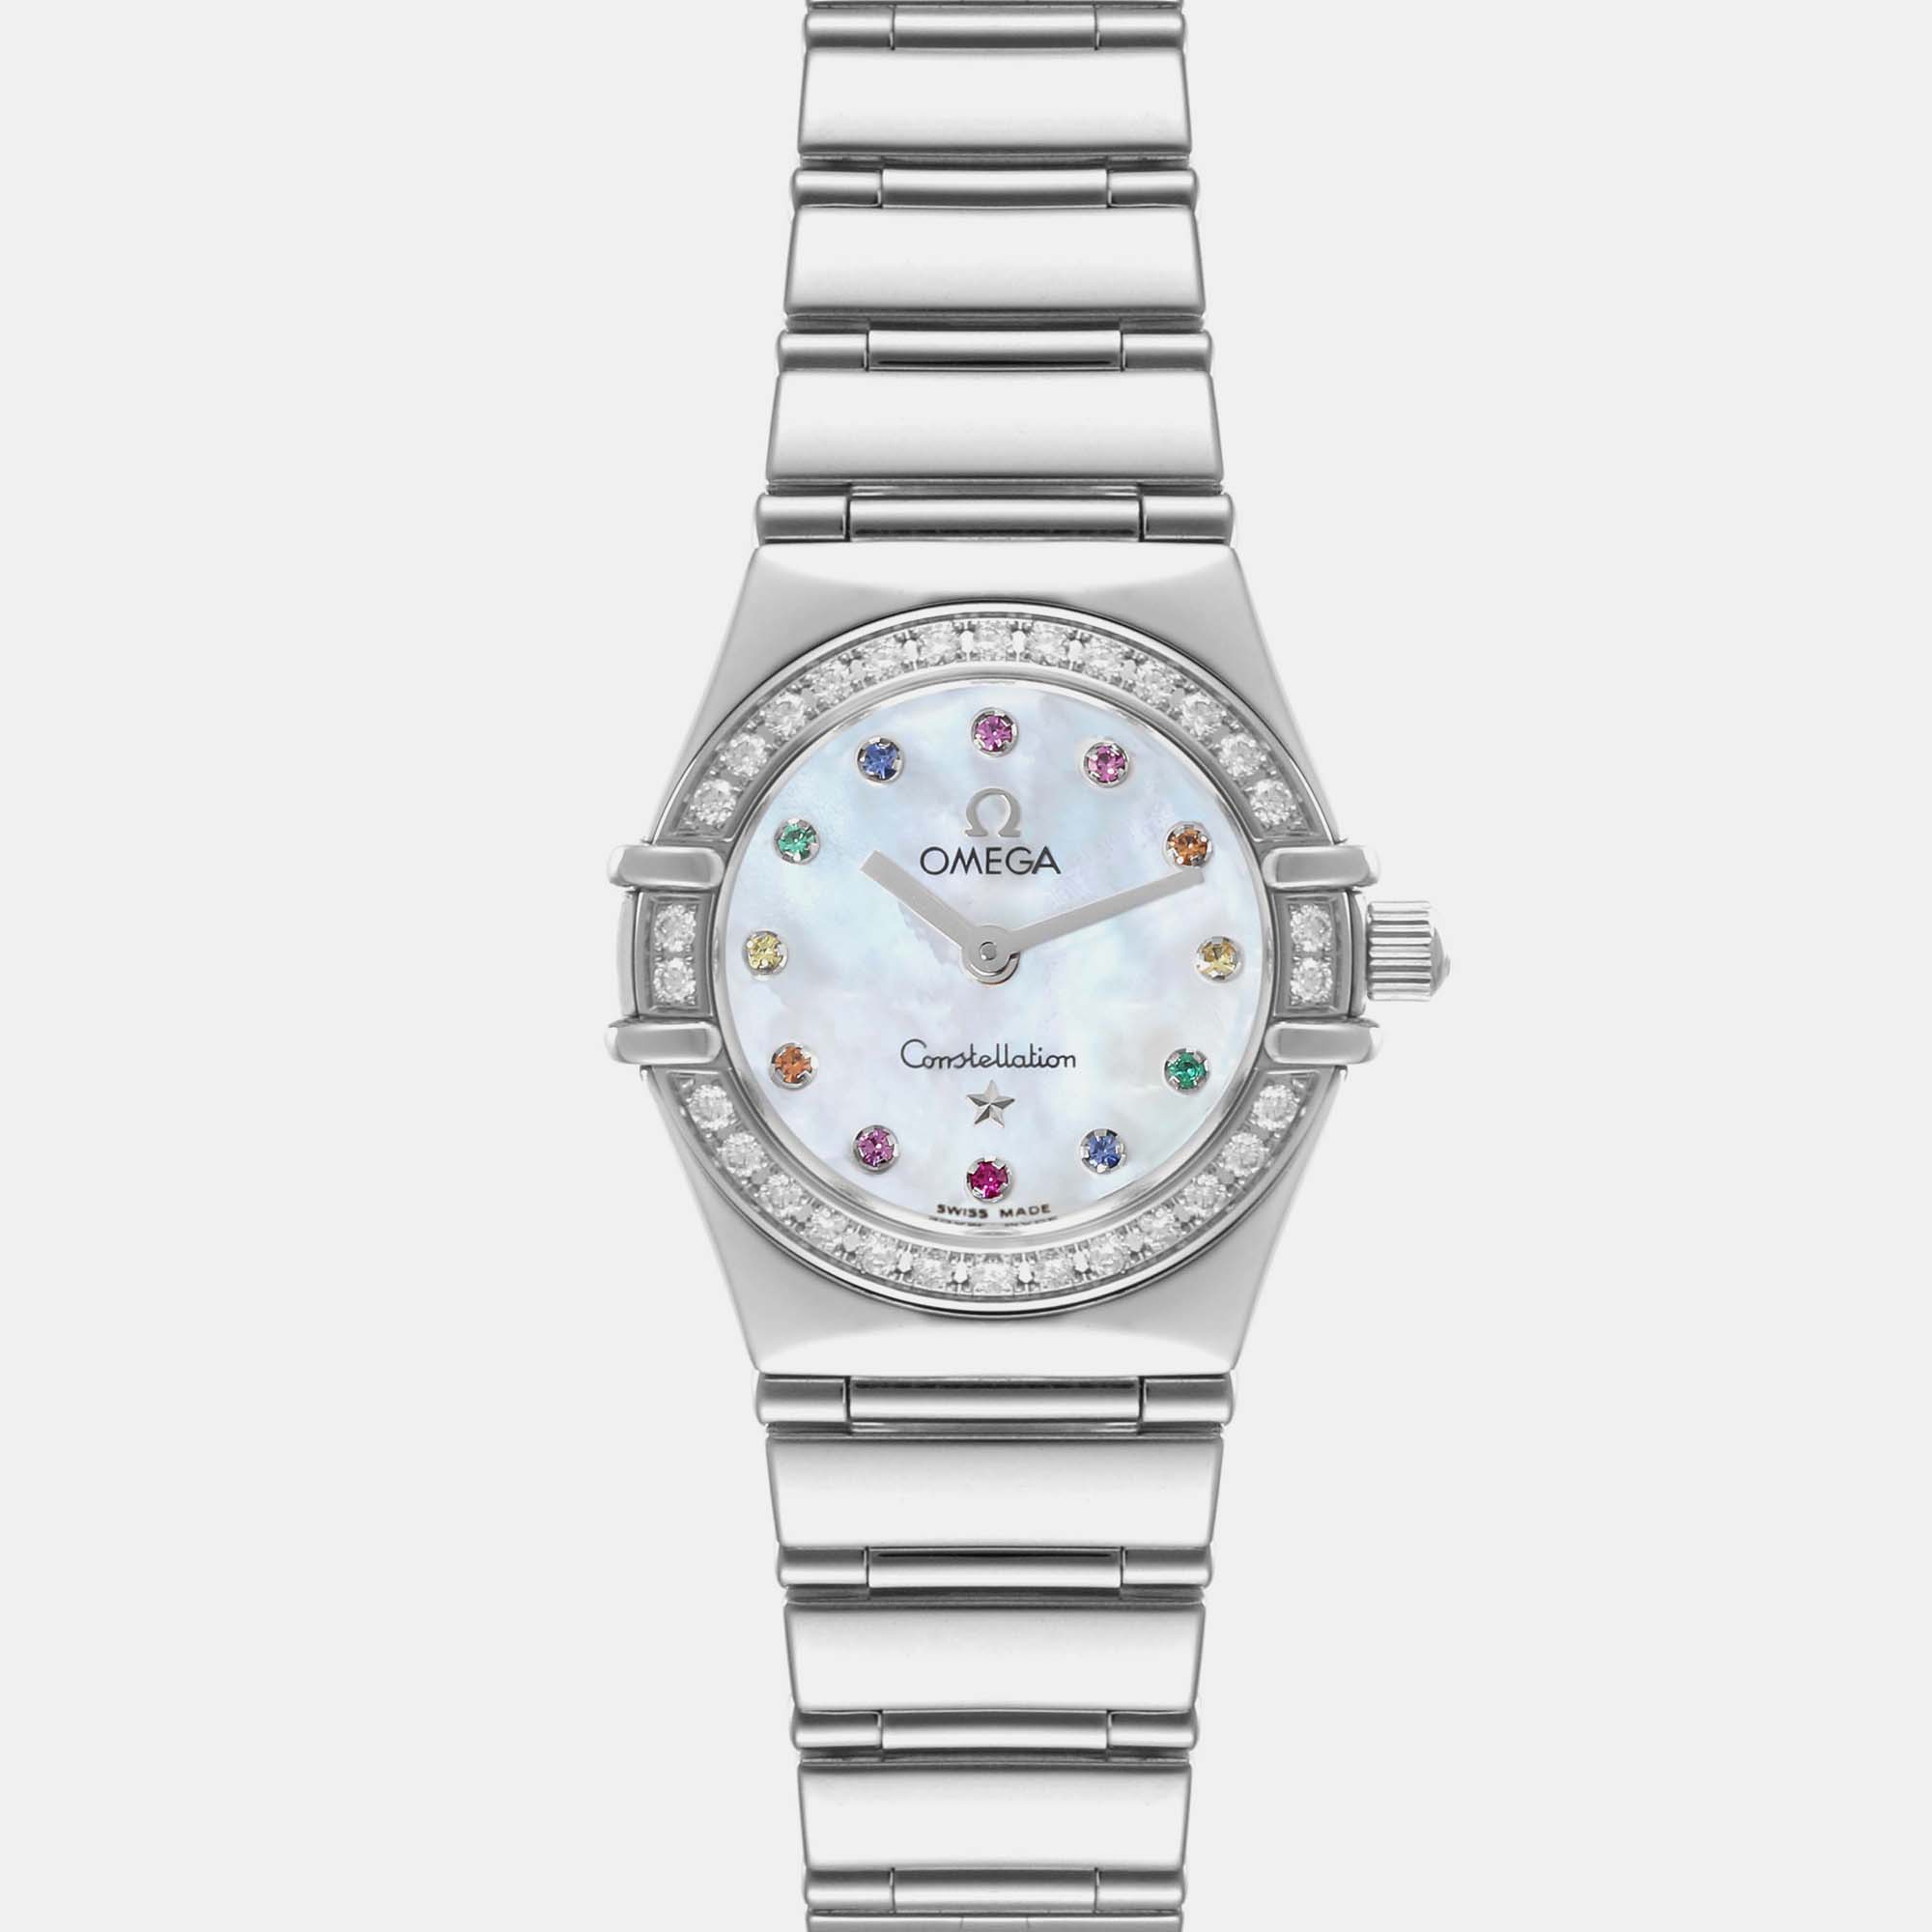 Omega mother of pearl diamond stainless steel constellation 1465.79.00 quartz women's wristwatch 22.5 mm